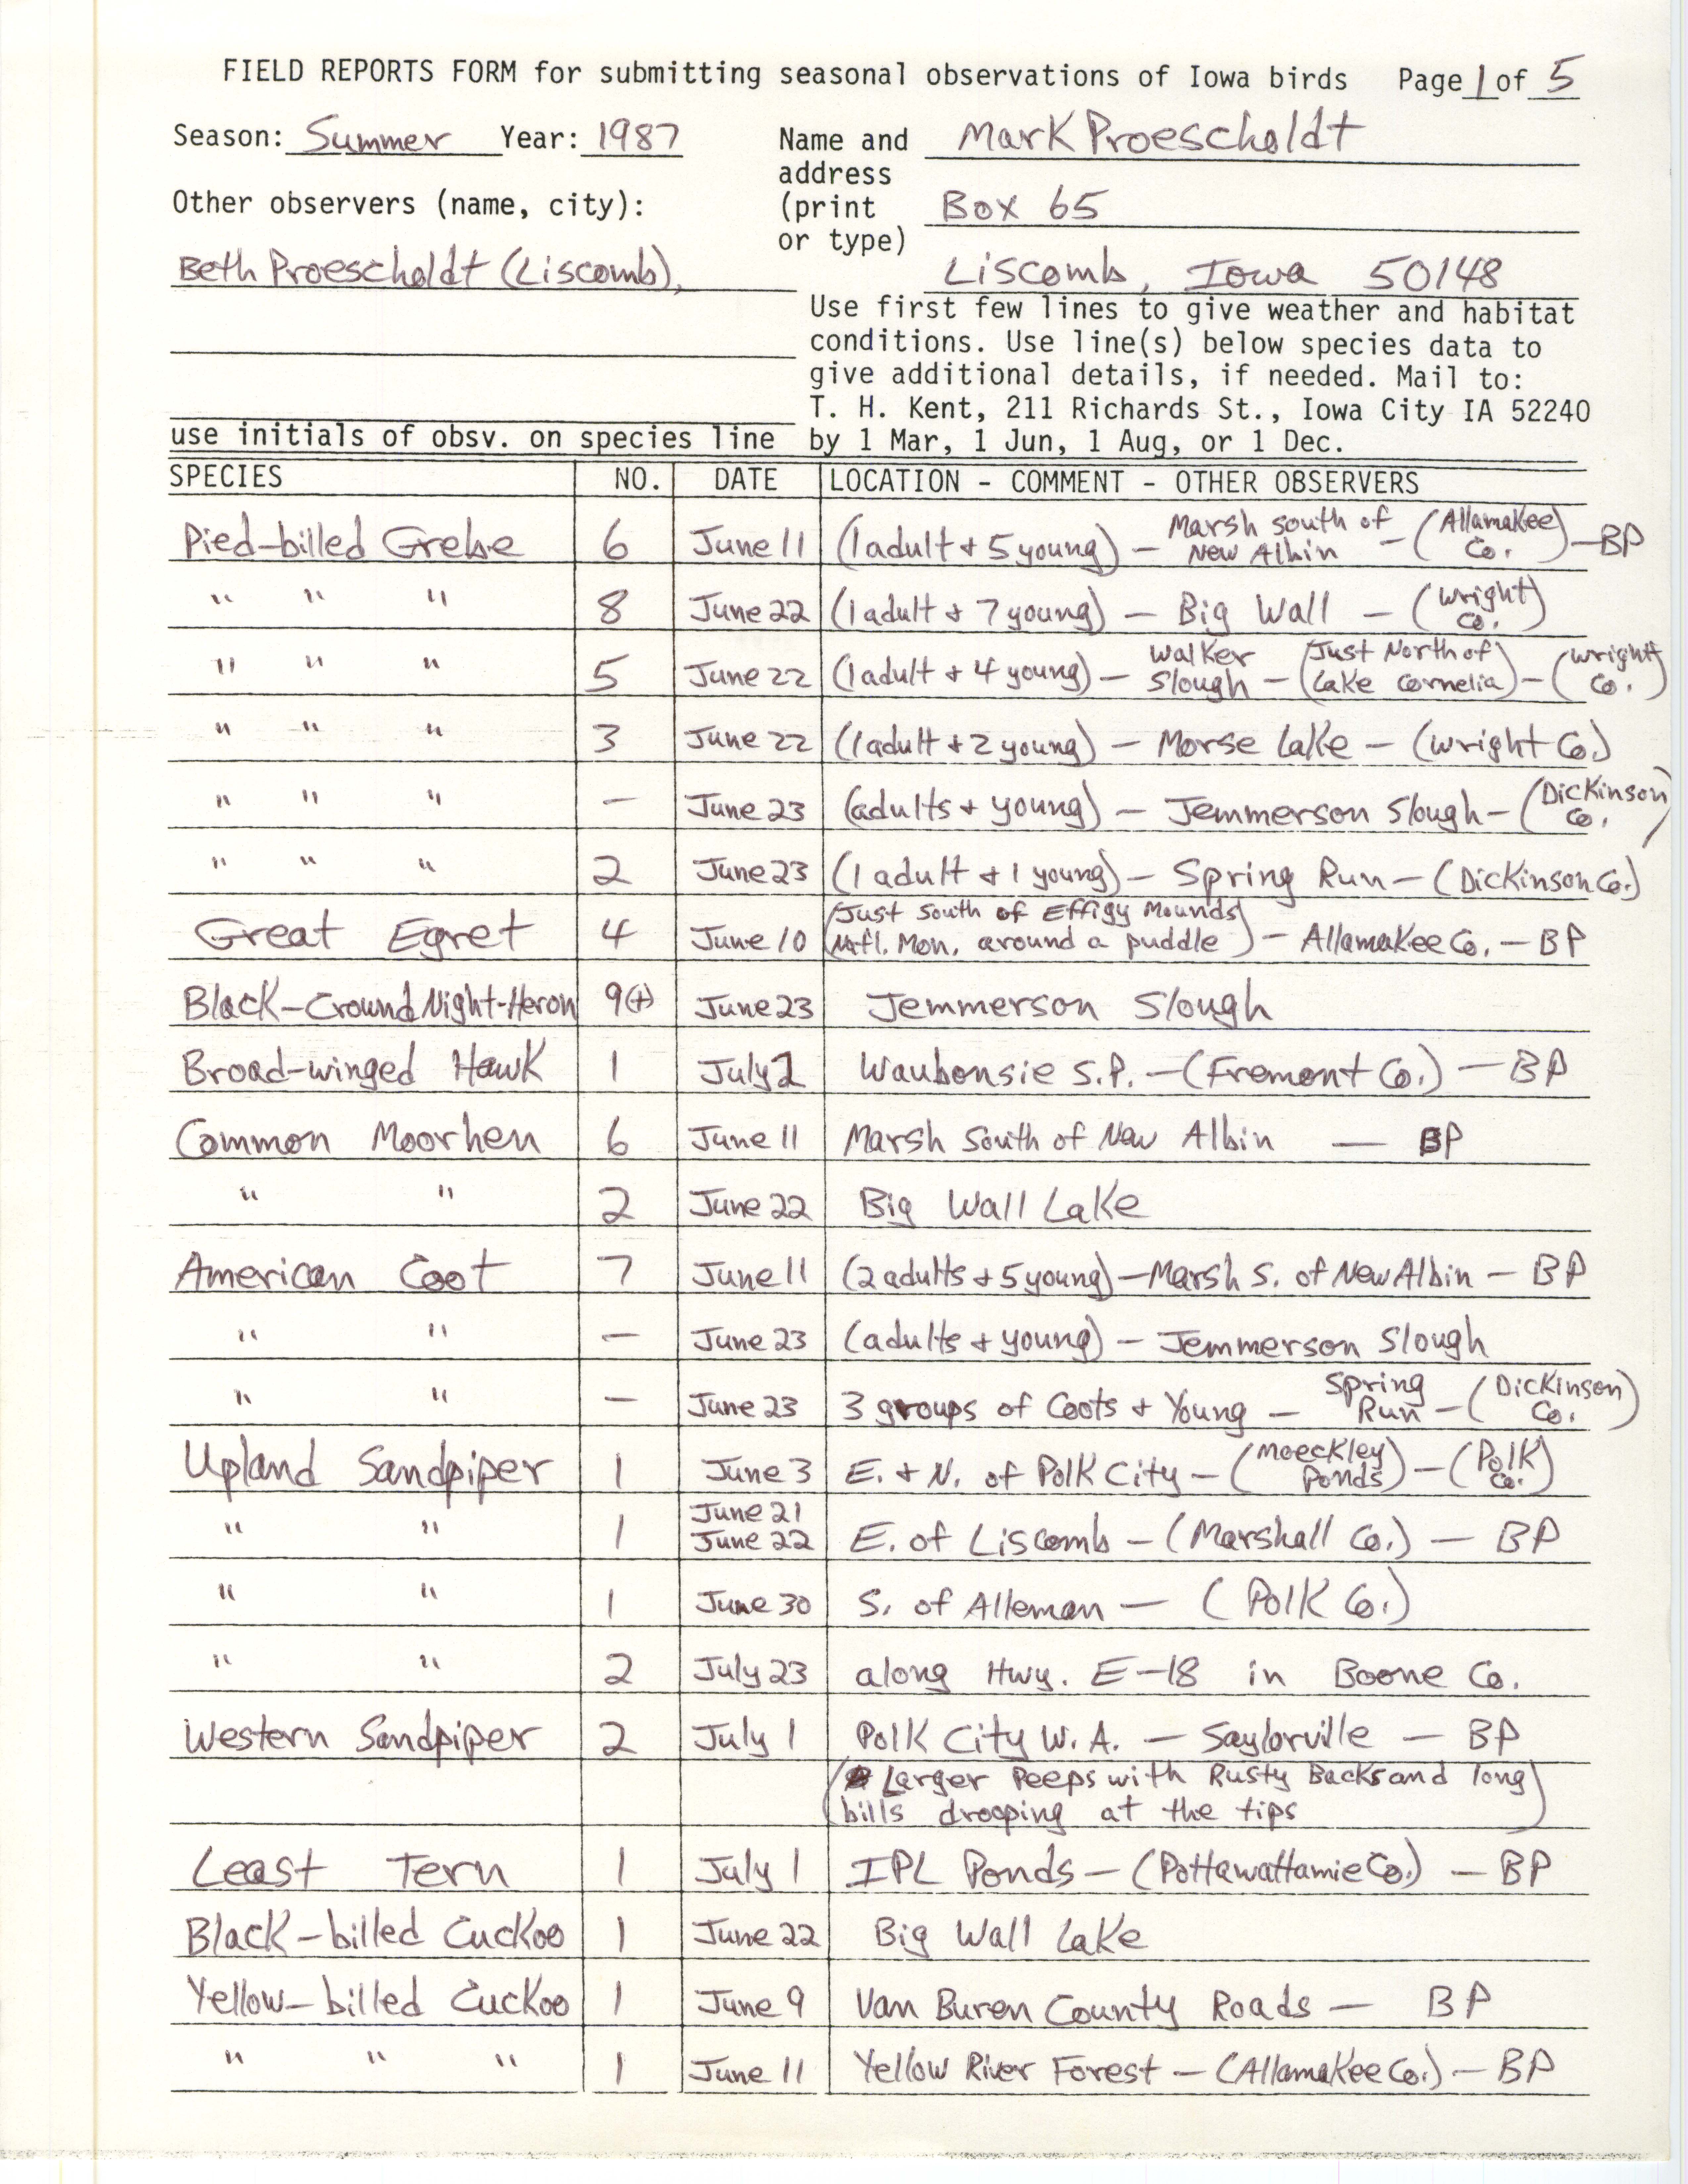 Field reports form for submitting seasonal observations of Iowa birds, Mark Proescholdt, summer 1987